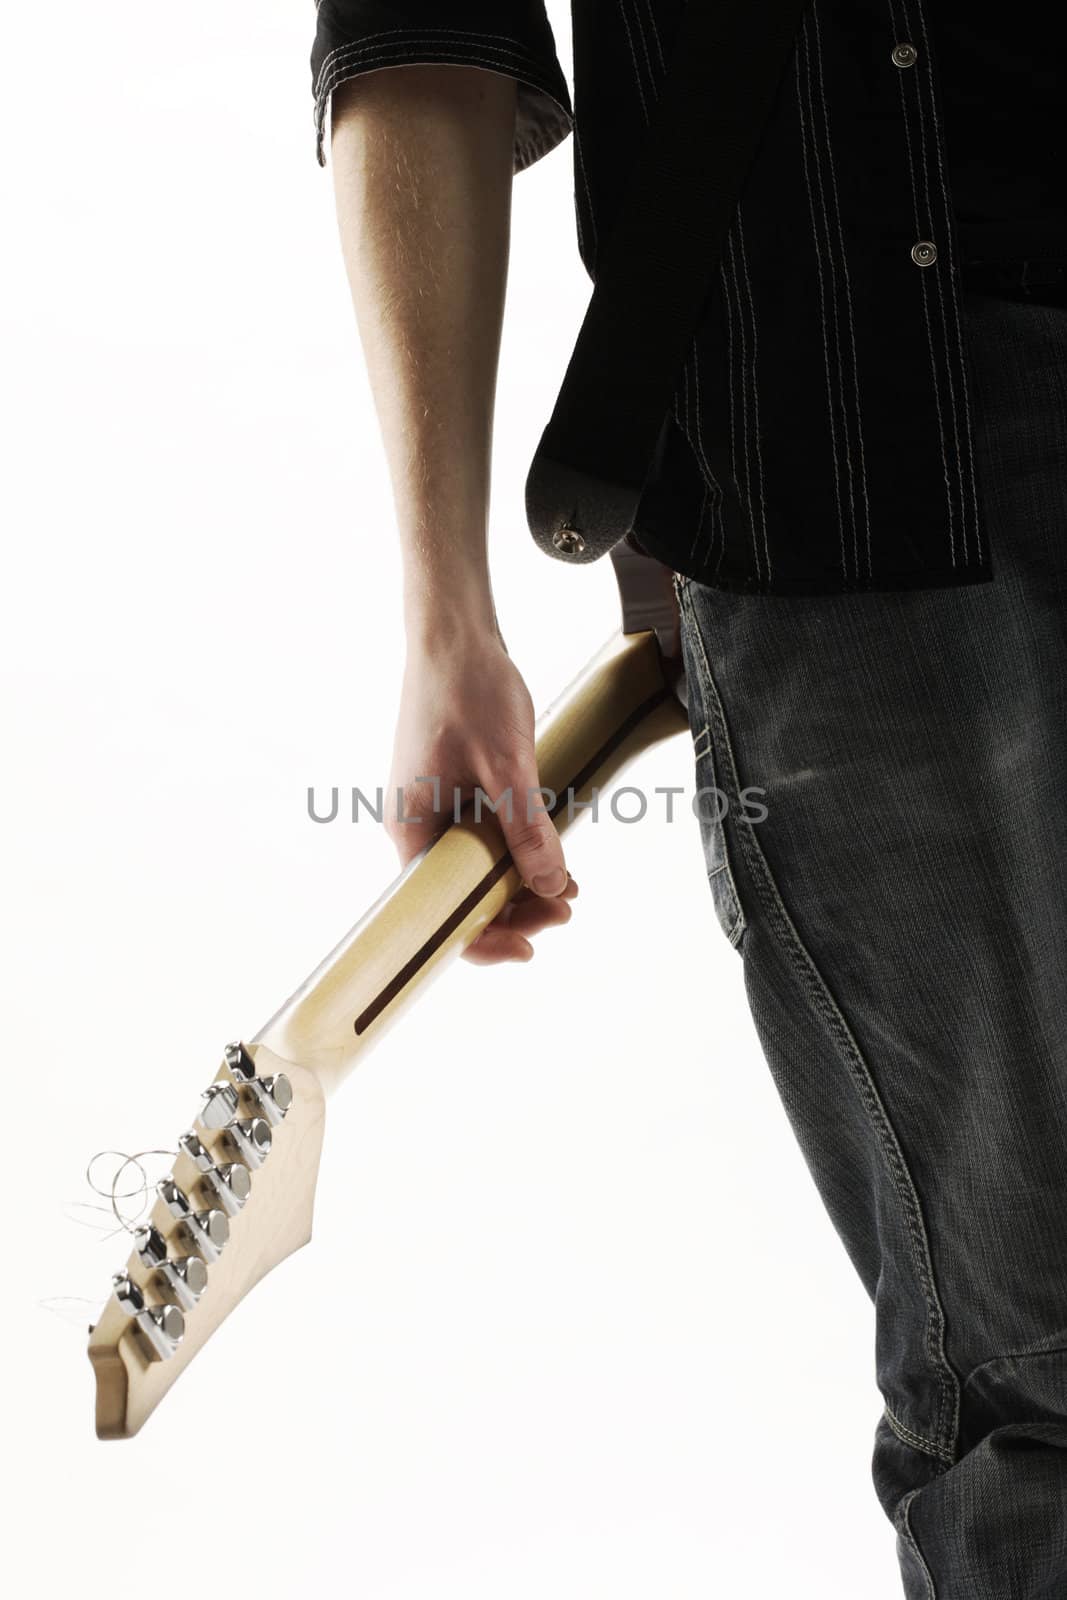 guitarist rock star isolated on white background by stokkete